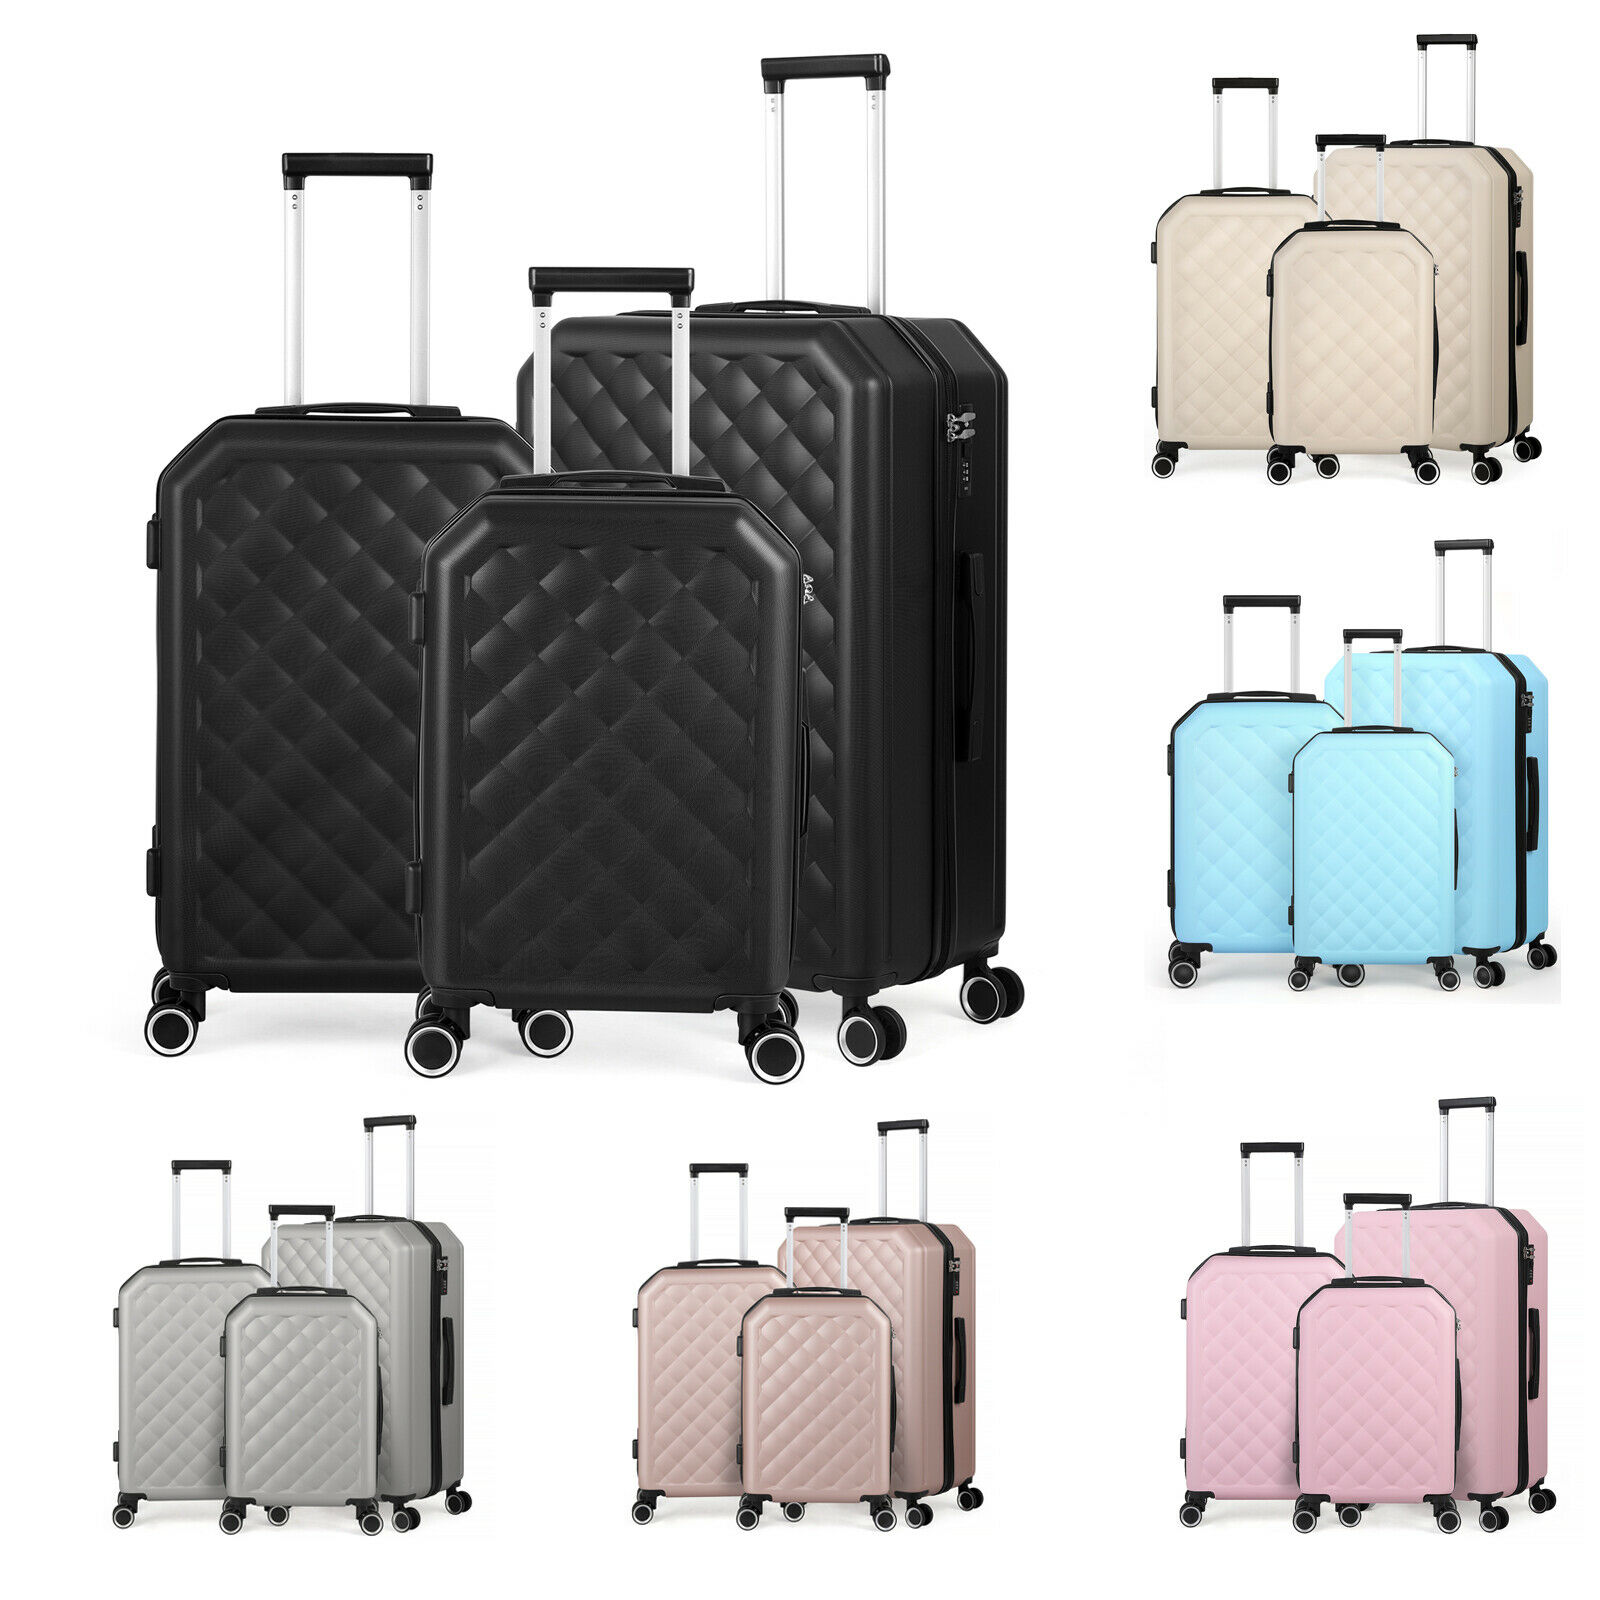 ABS 3 Piece Suitcase Set Carry on Luggage with Wheels Lock Spinner 20/24/28 in